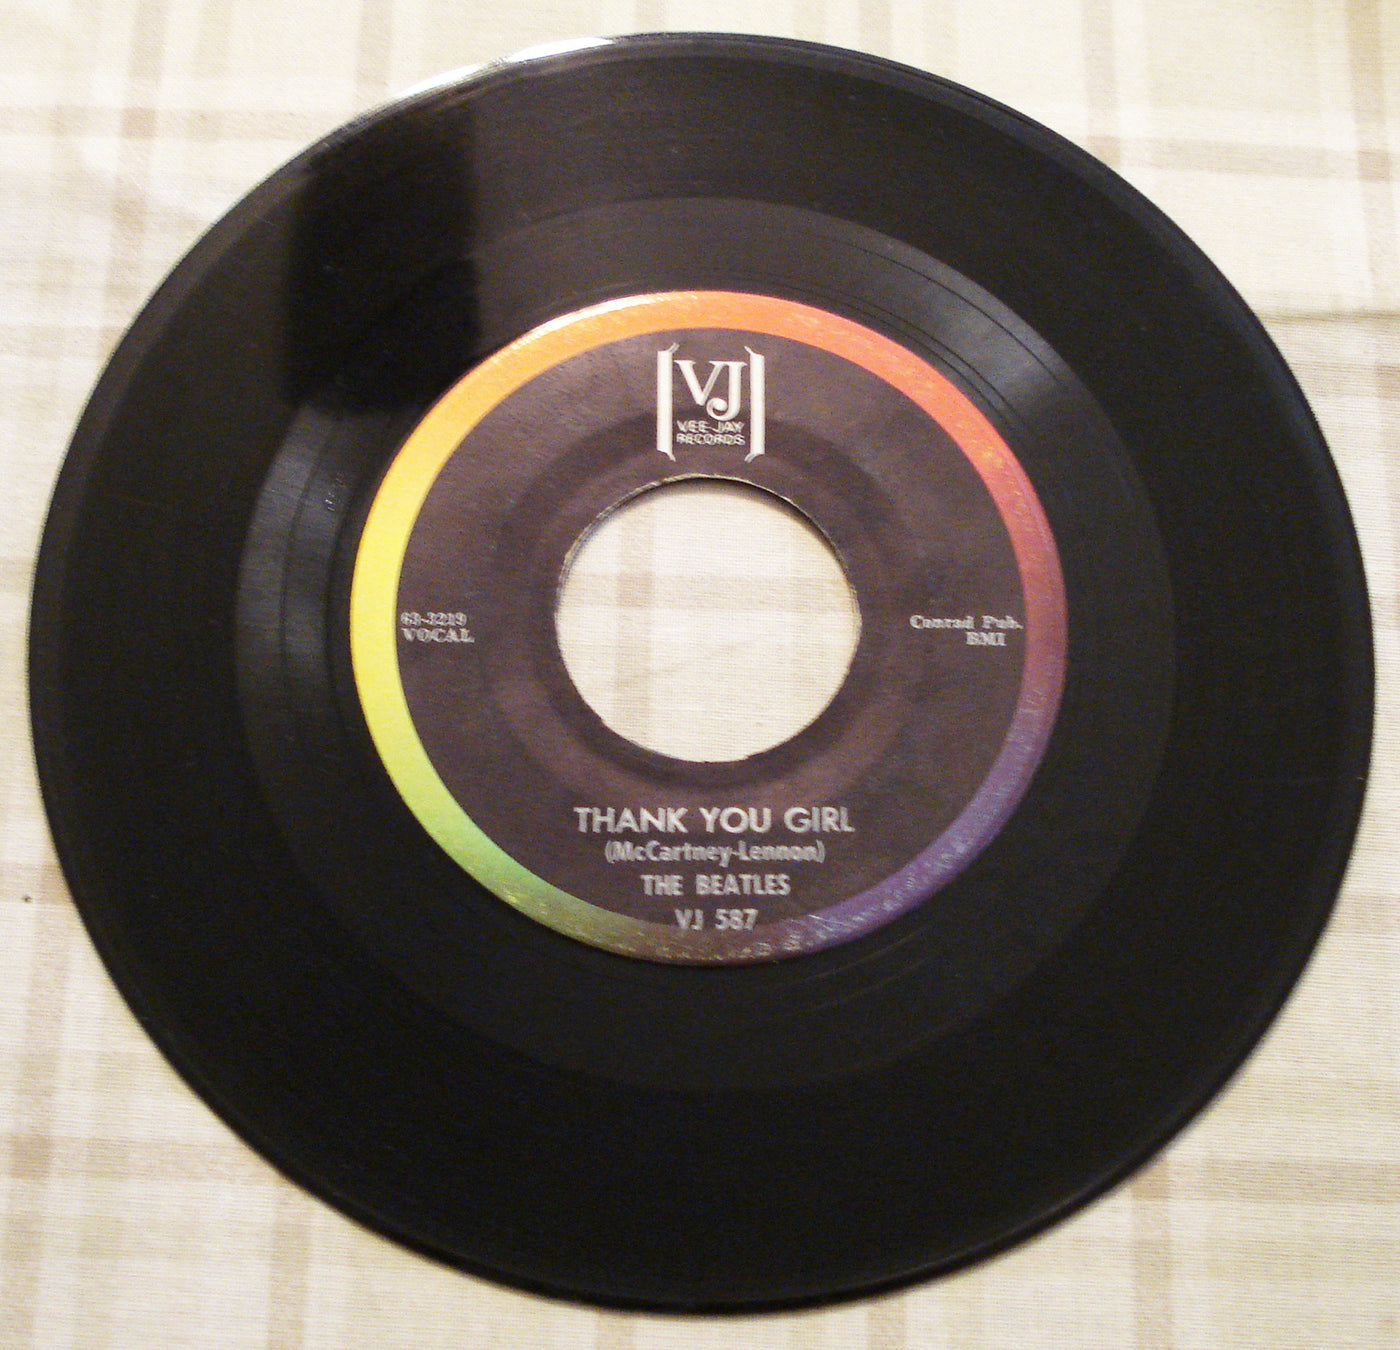 The Beatles Do You Want To Know A Secret?-Thank You Girl (1963) Vinyl Single 45rpm VJ-587